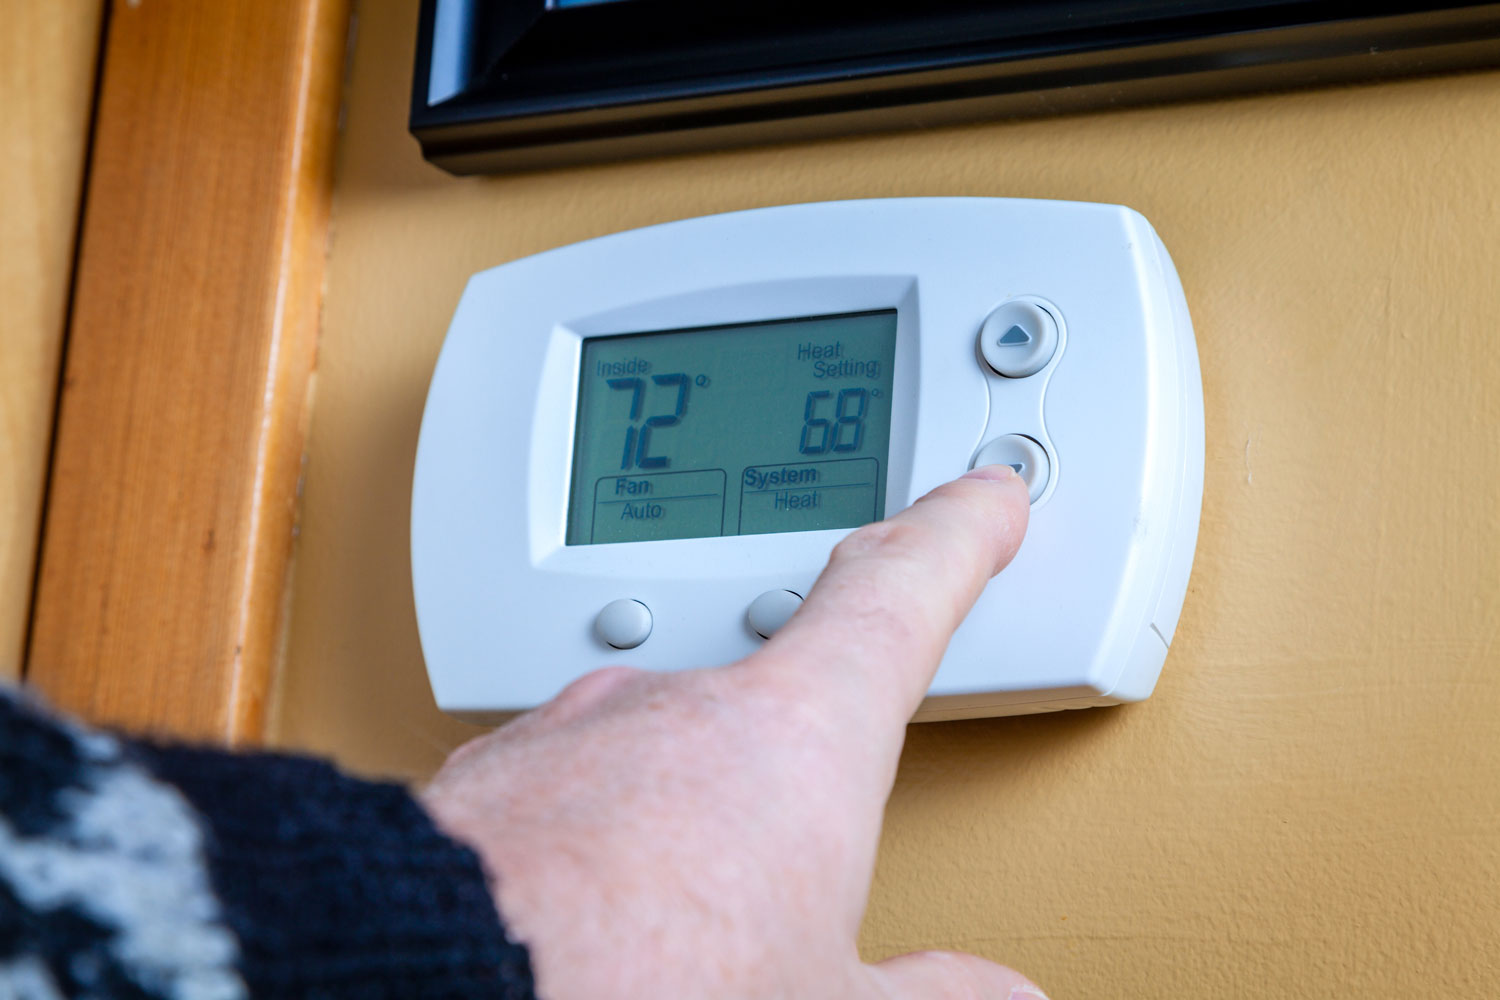 A person lowers temperature on a home thermostat. Enegry saving concept